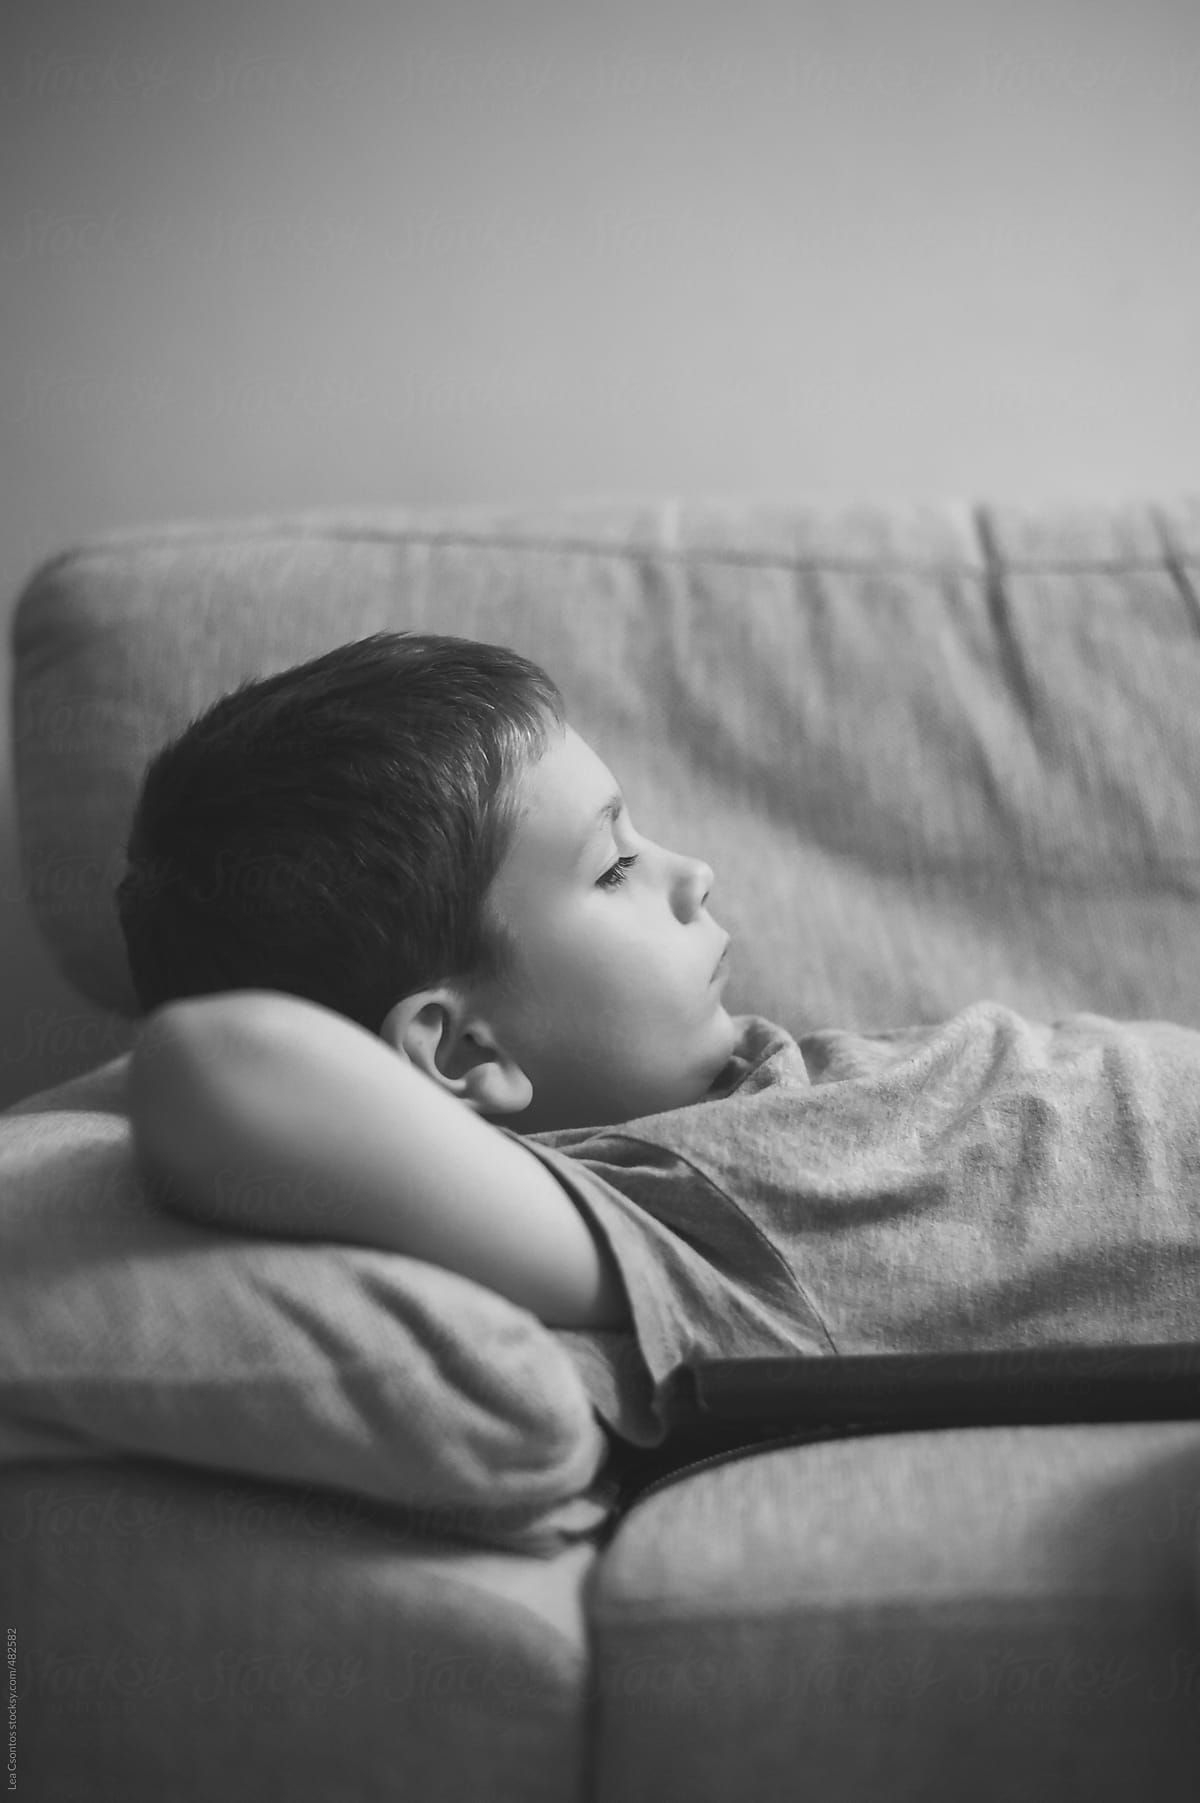 Young boy lying on a sofa in a relaxed manner with a serious face